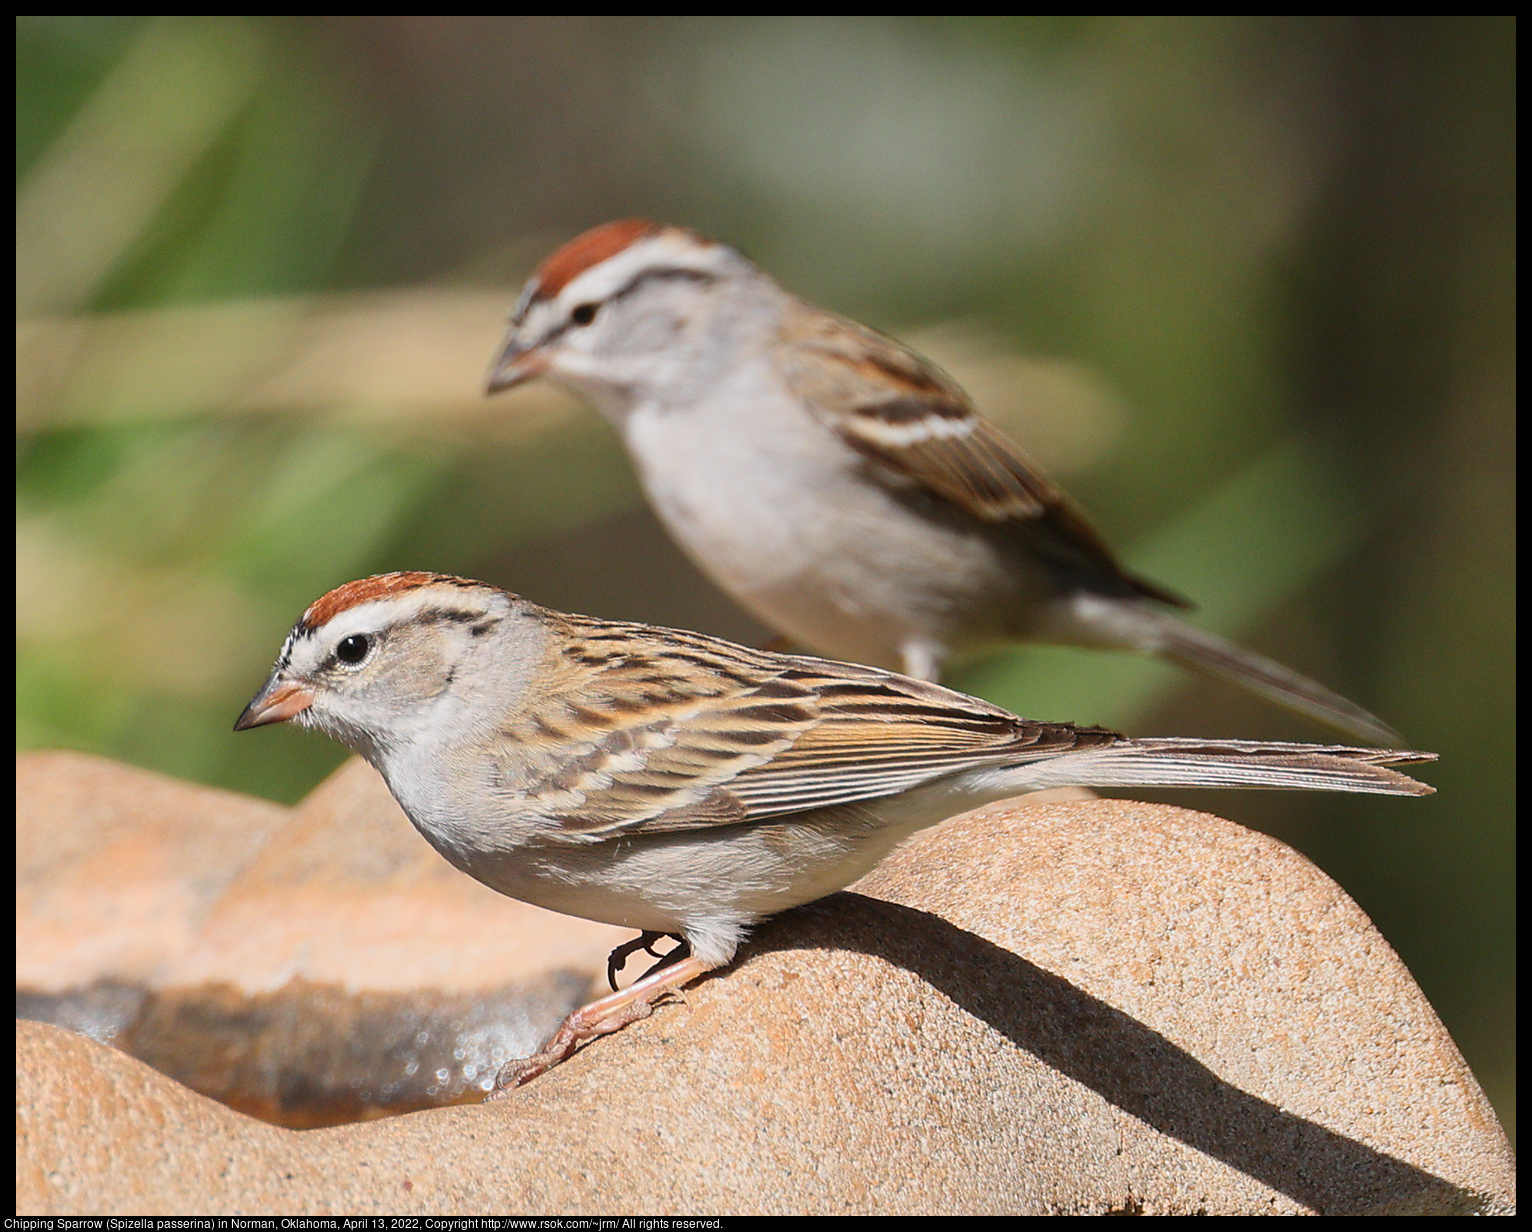 Chipping Sparrow (Spizella passerina) in Norman, Oklahoma, April 13, 2022